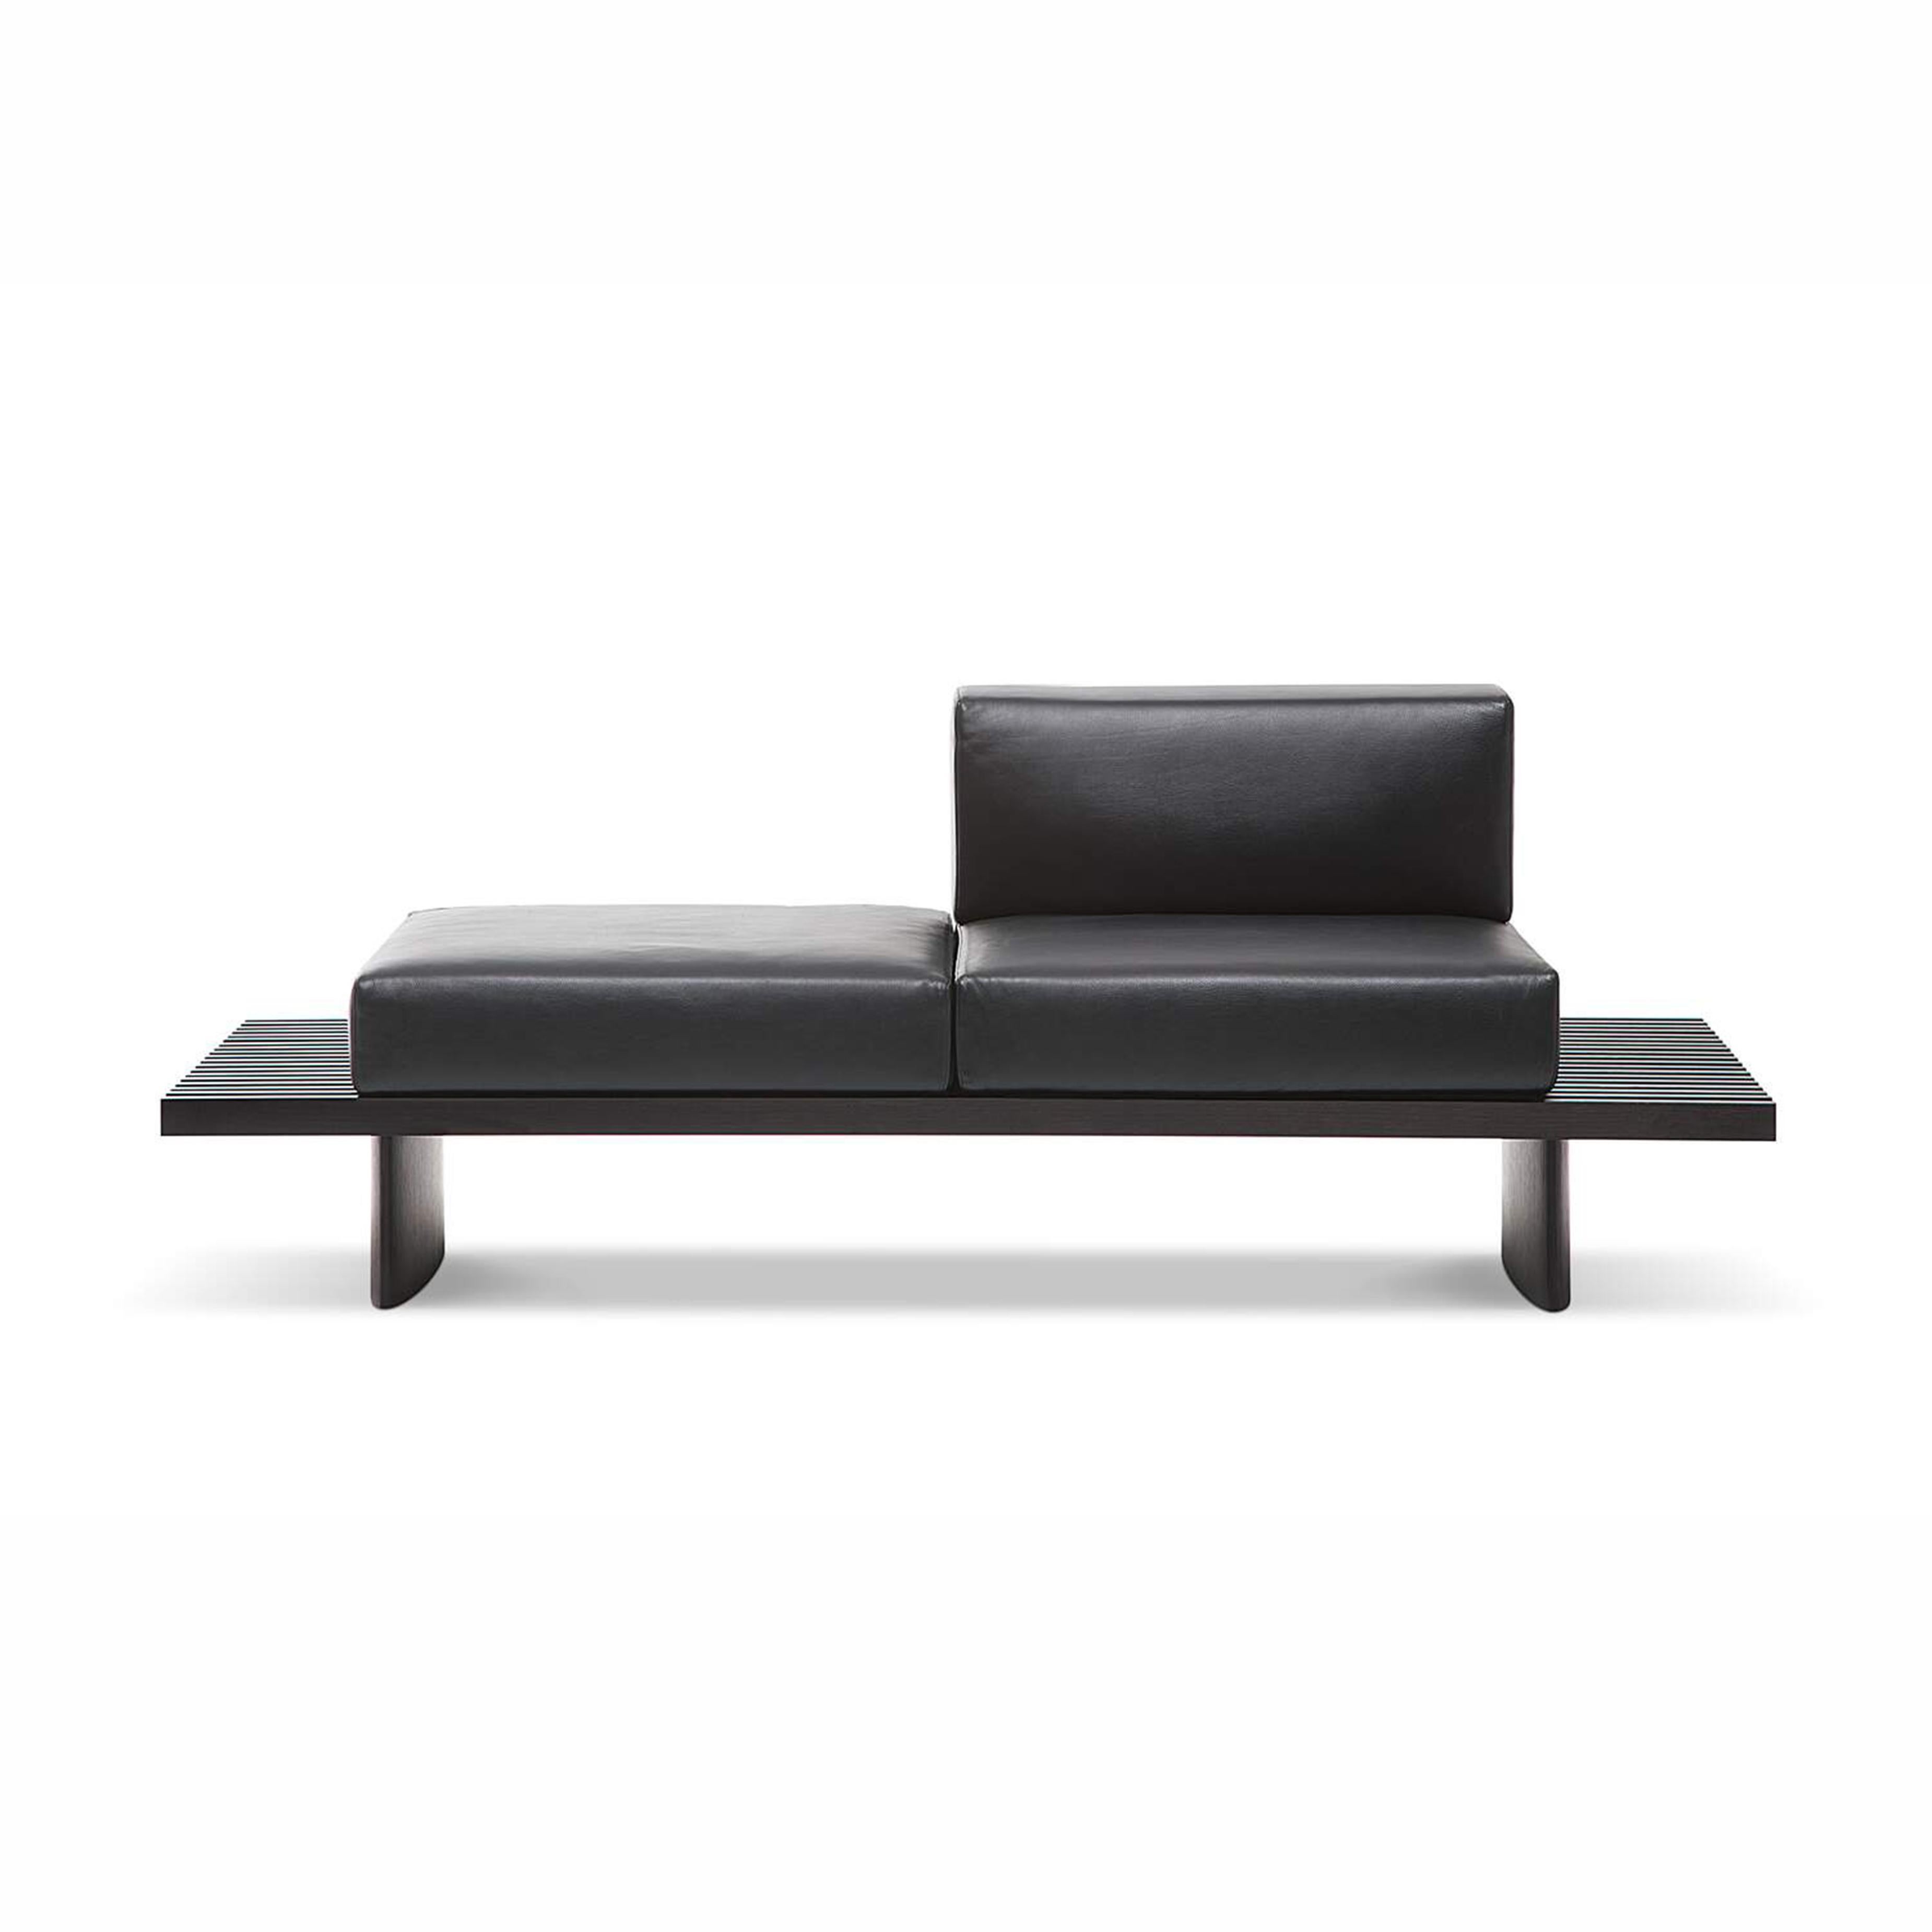 Charlotte Perriand Refolo Modular Sofa, Wood and Black Leather by Cassina For Sale 1